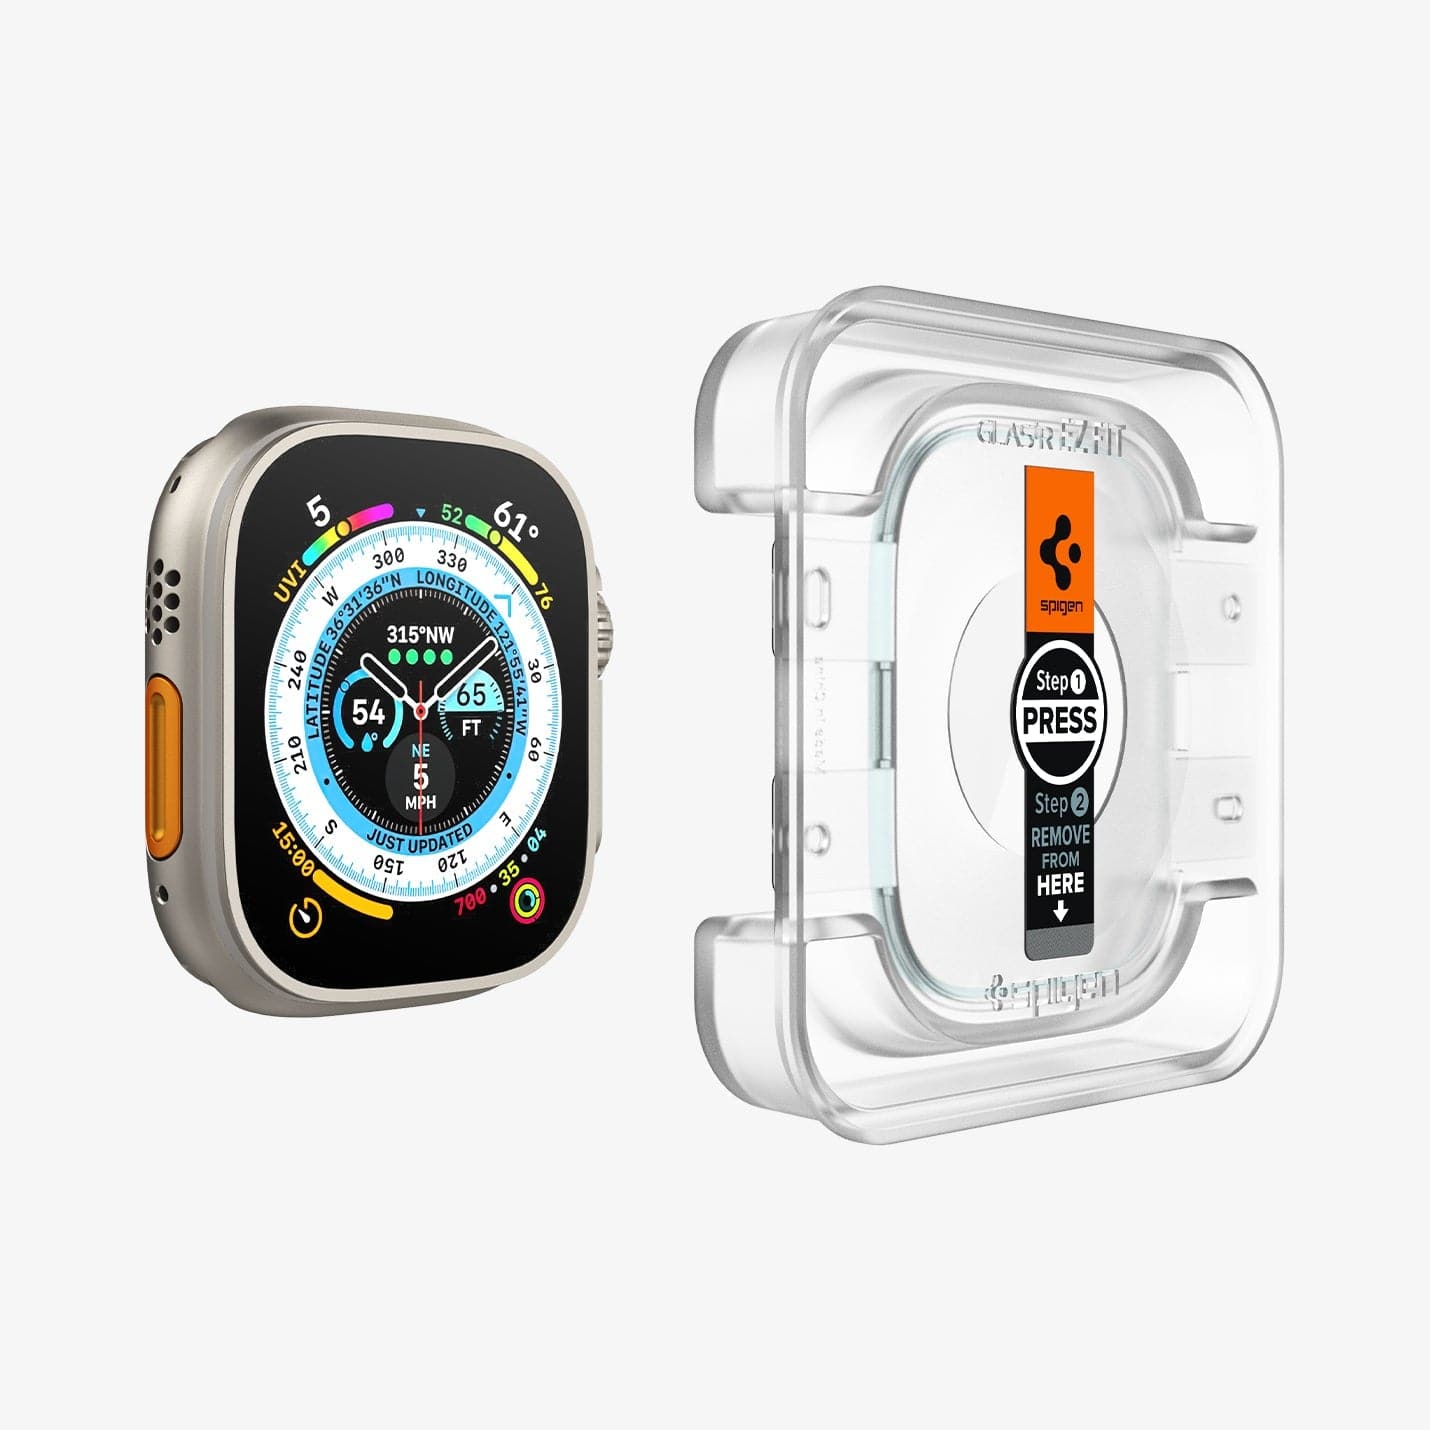 Apple Watch Protective Bands | iWatch Protective Cover | Rhino Brand